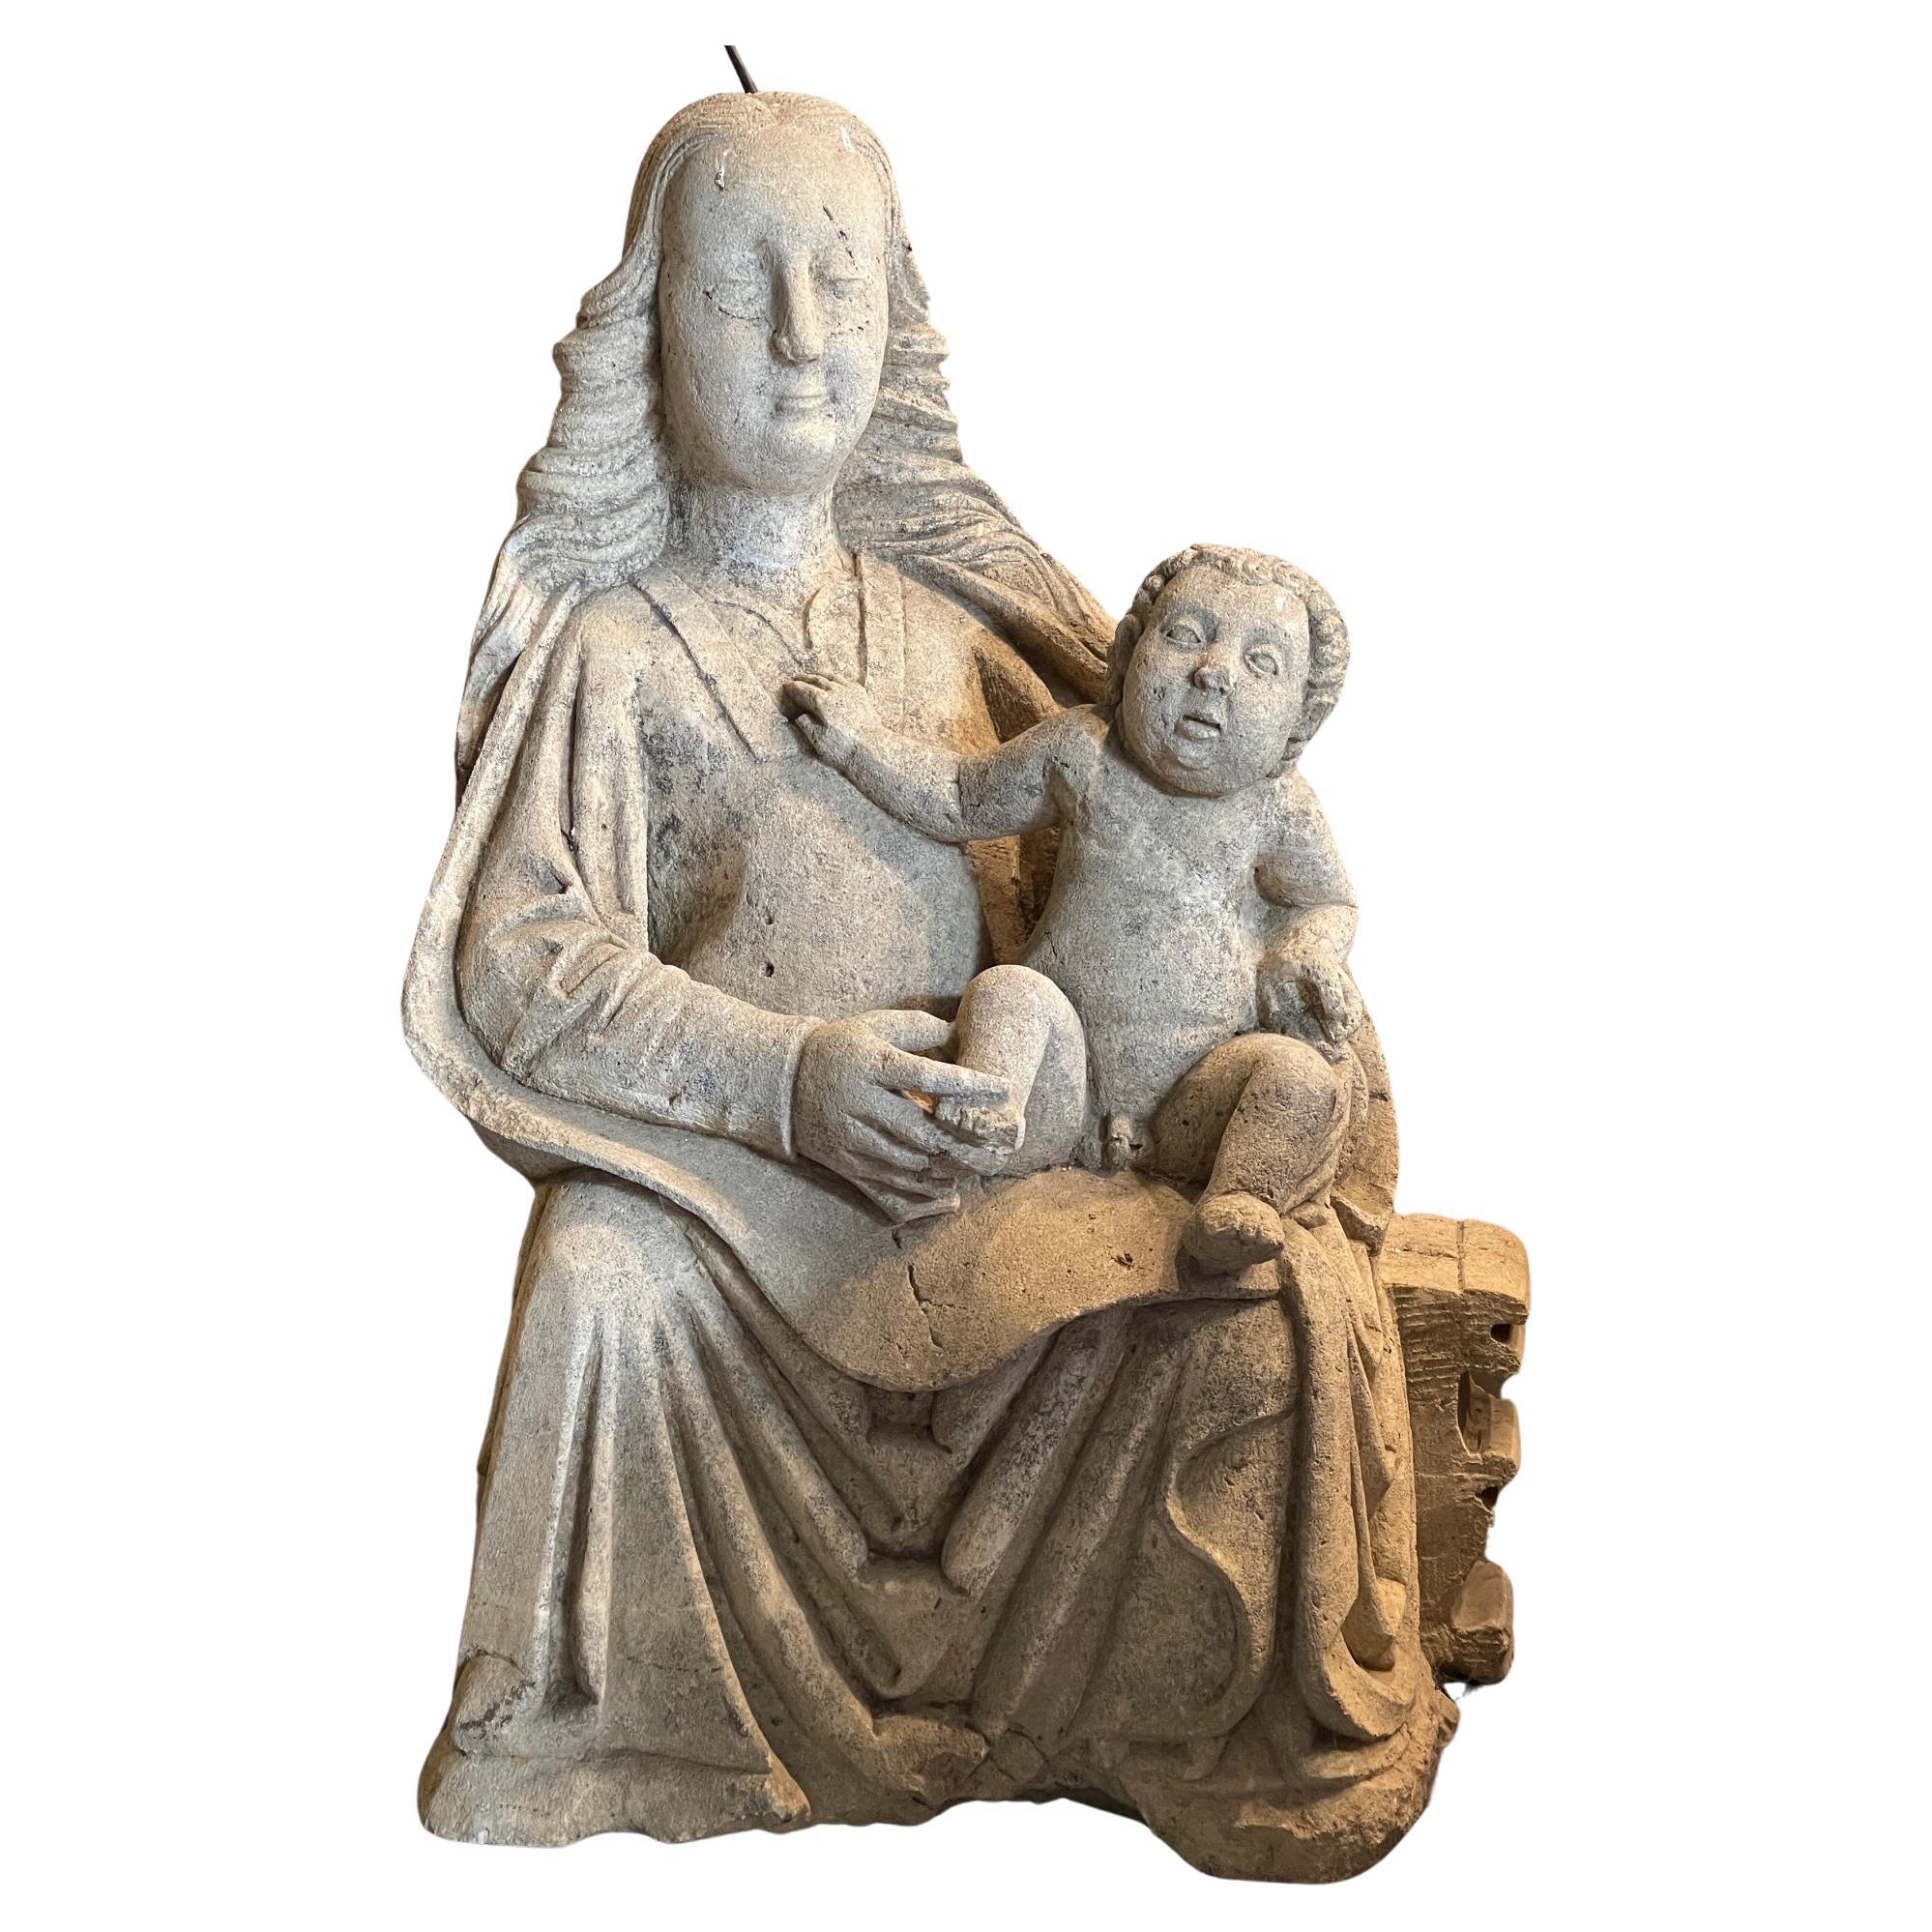 C1350 limestone sculpture of seated Madonna with 6 fingers on her right hand For Sale